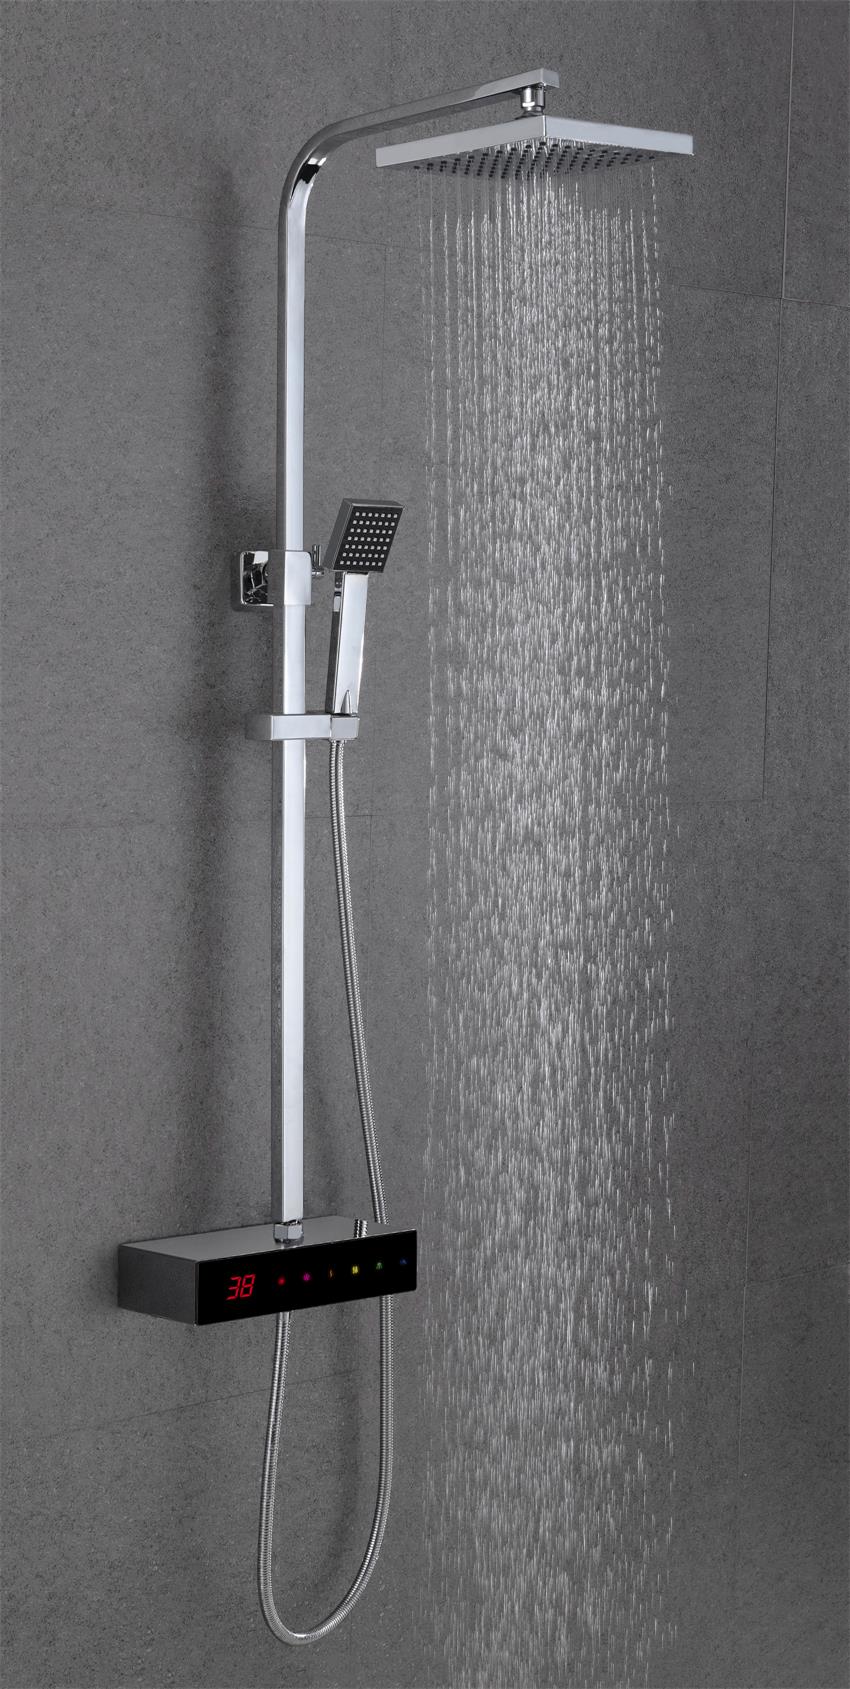 Full-touch screen digital thermostatic shower faucet XS-M9205